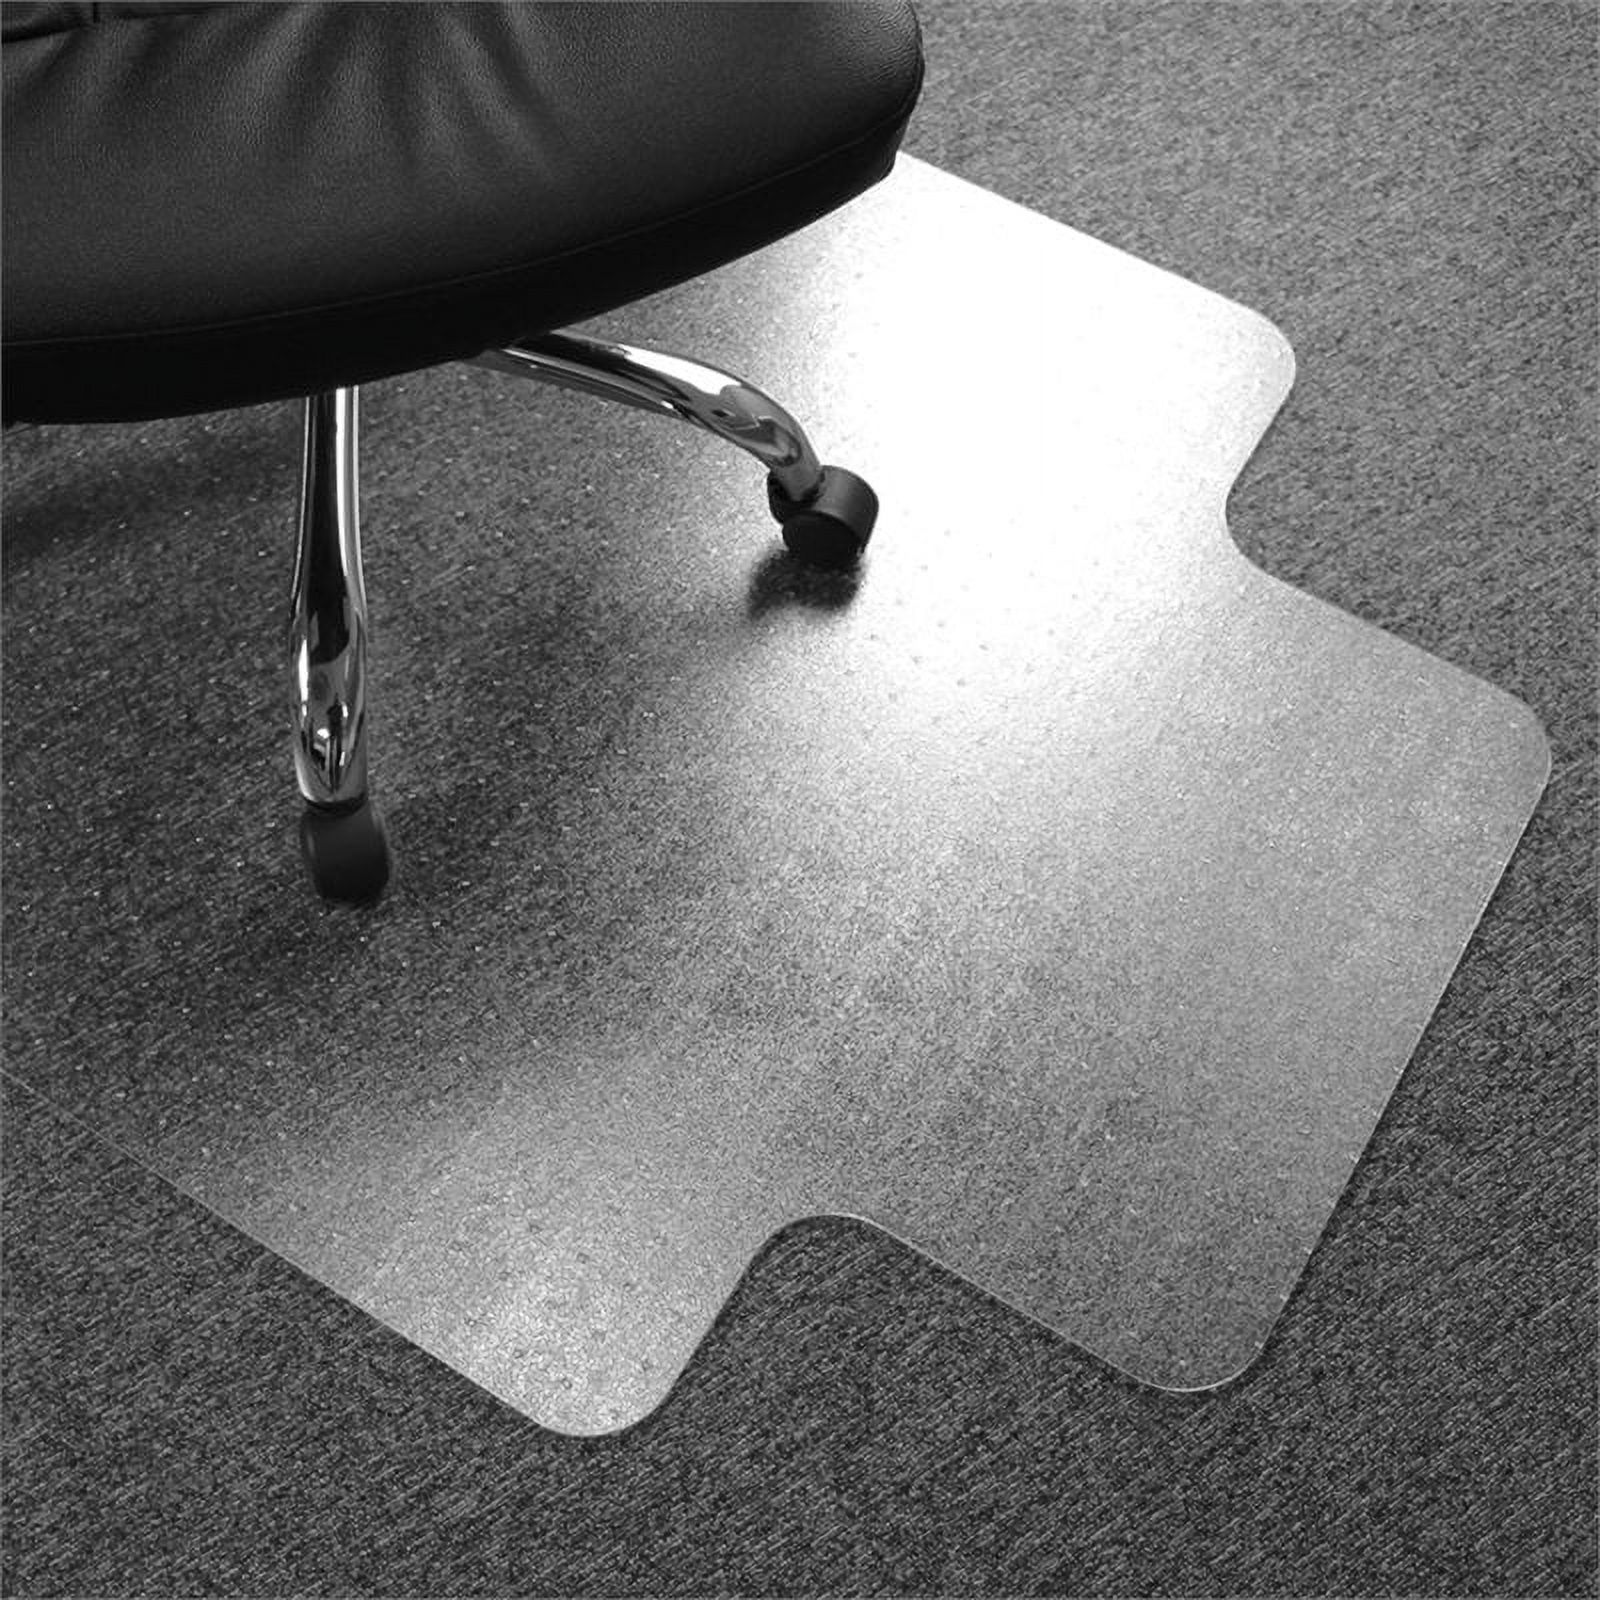 Advantagemat® Vinyl Lipped Chair Mat for Carpets up to 1/4" - 45" x 53" - image 2 of 7